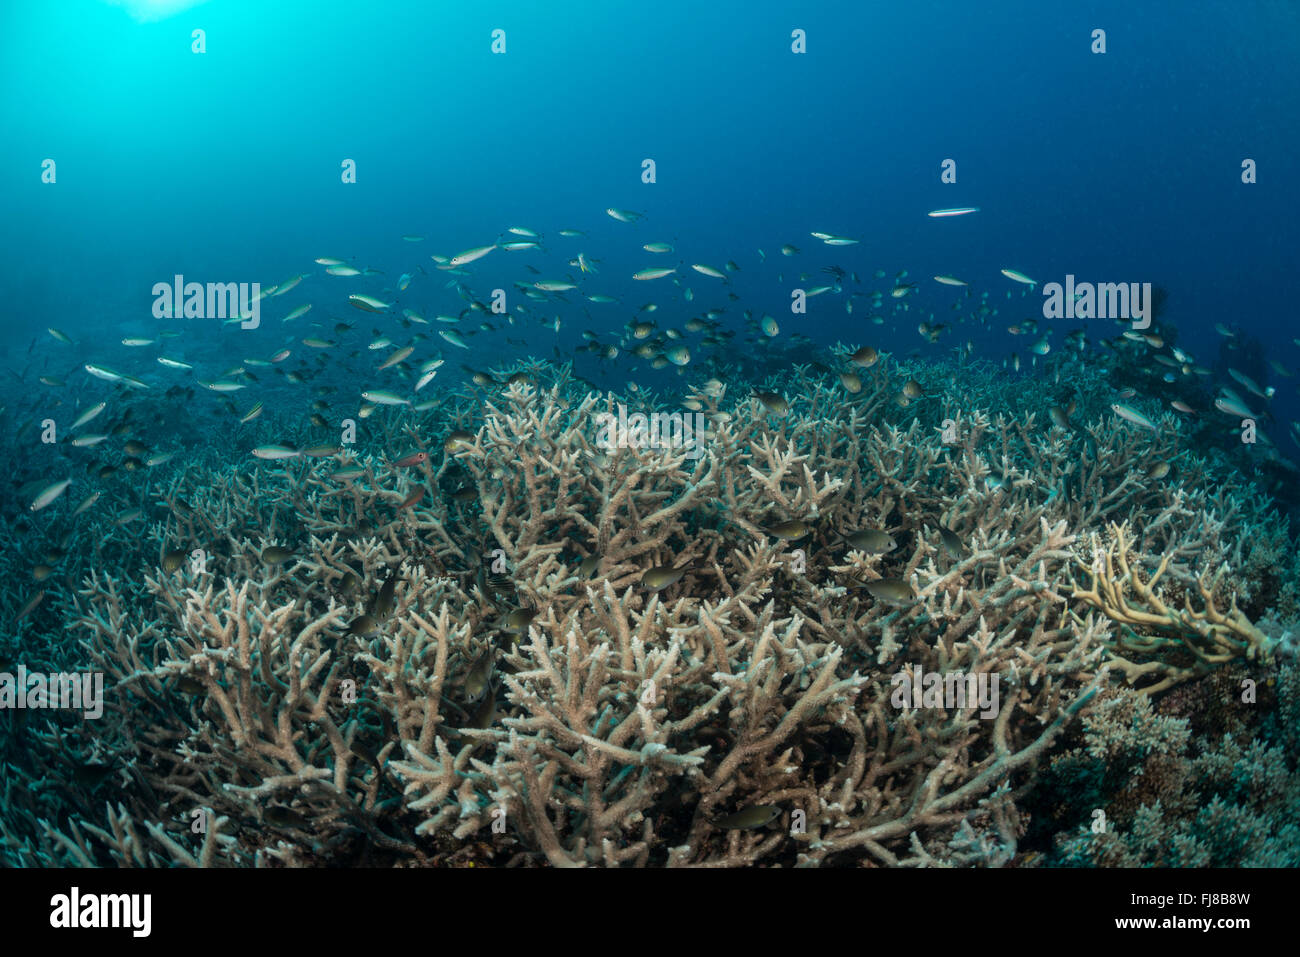 Acropora corals with reef basslets and fusiliers hovering above. Stock Photo